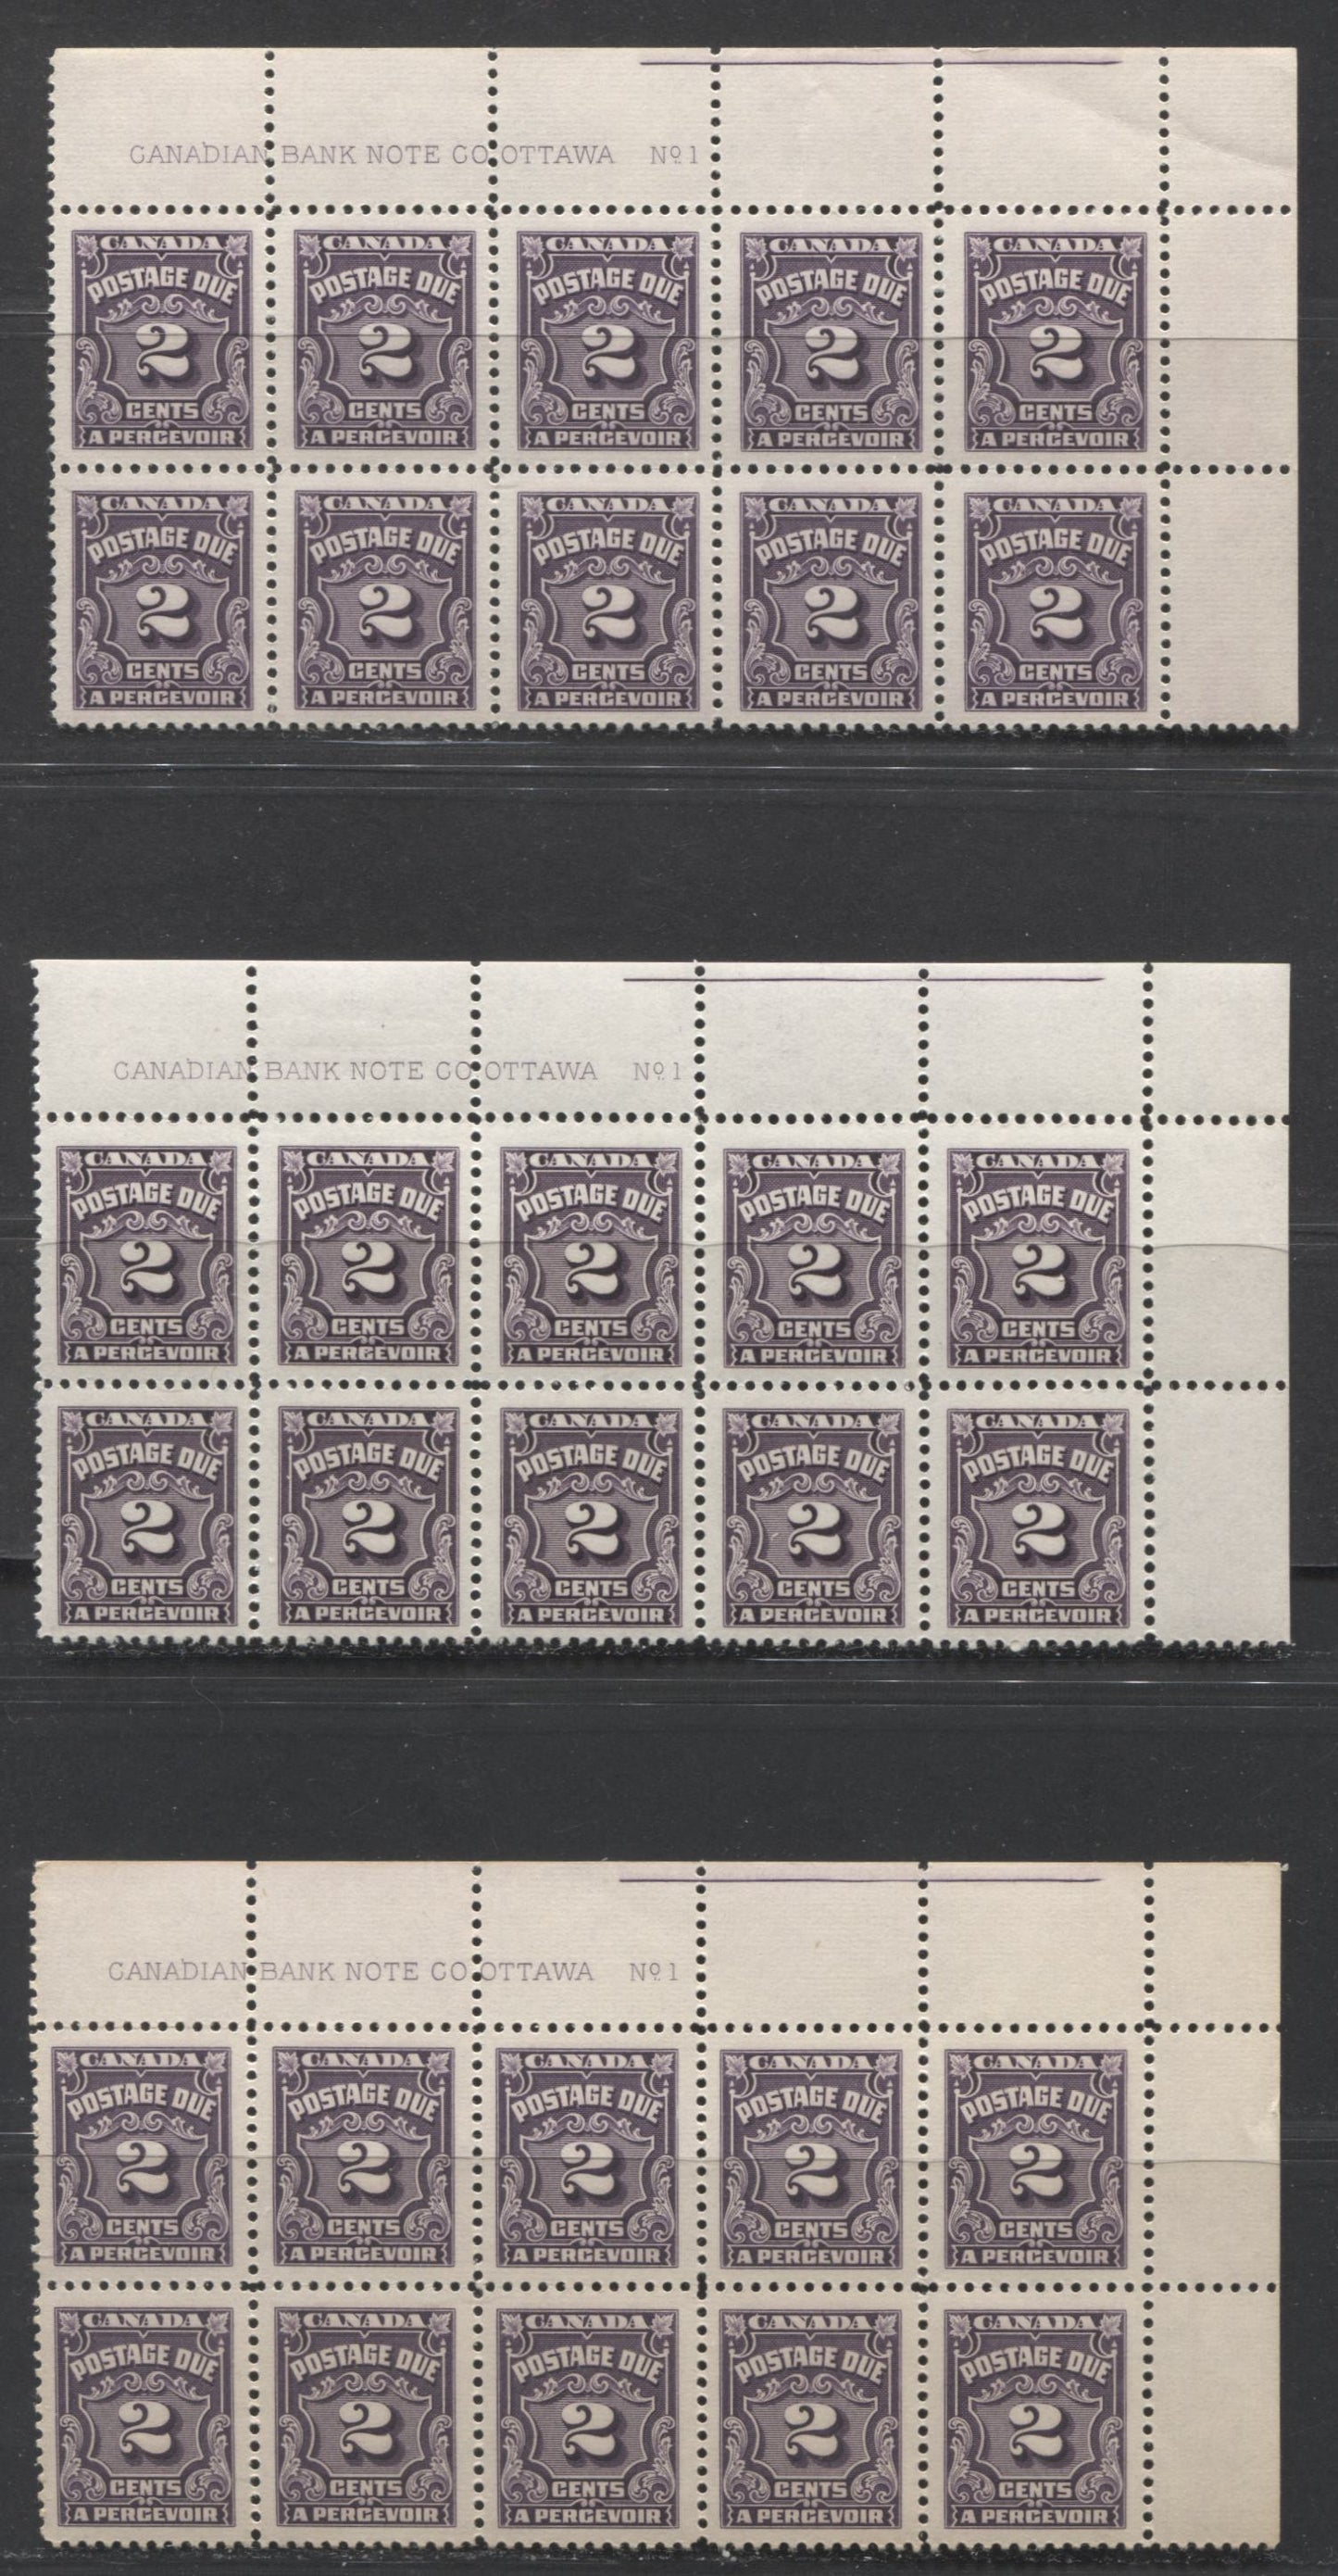 Lot 63 Canada #J16 2c Dark Violet, 1935-1965 Fourth Postage Due Issue, 3 VFNH/LH UR Plate 1 Blocks Of 10 With Cutting Guidelines At UR And Different Papers, Gums & Shades